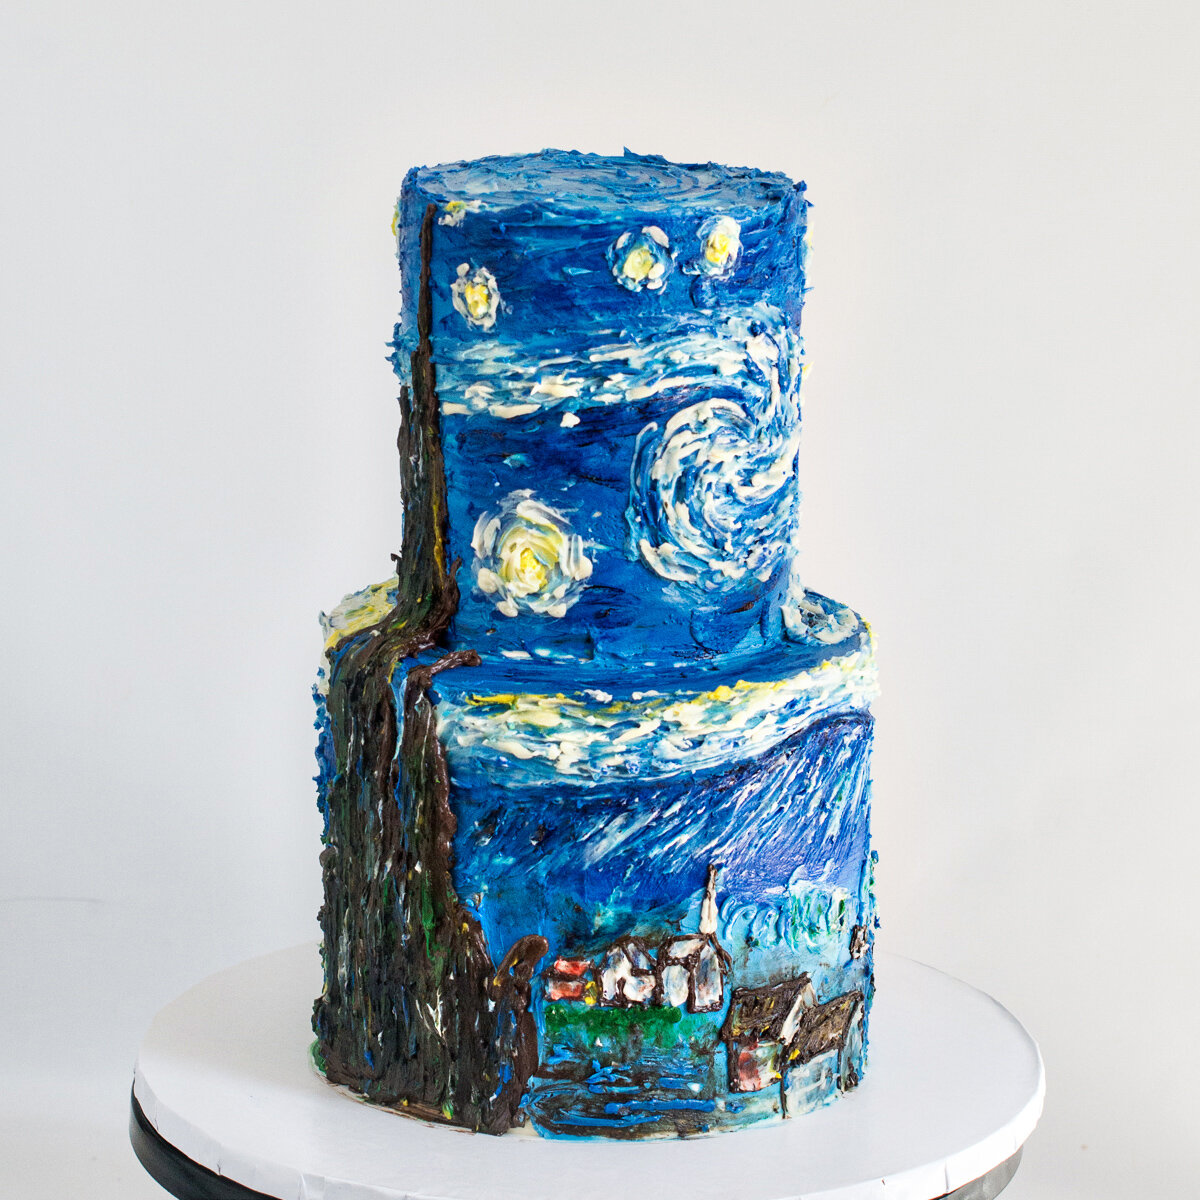 Tsokobest cakes - Beautiful Blue themed cake for Him with... | Facebook